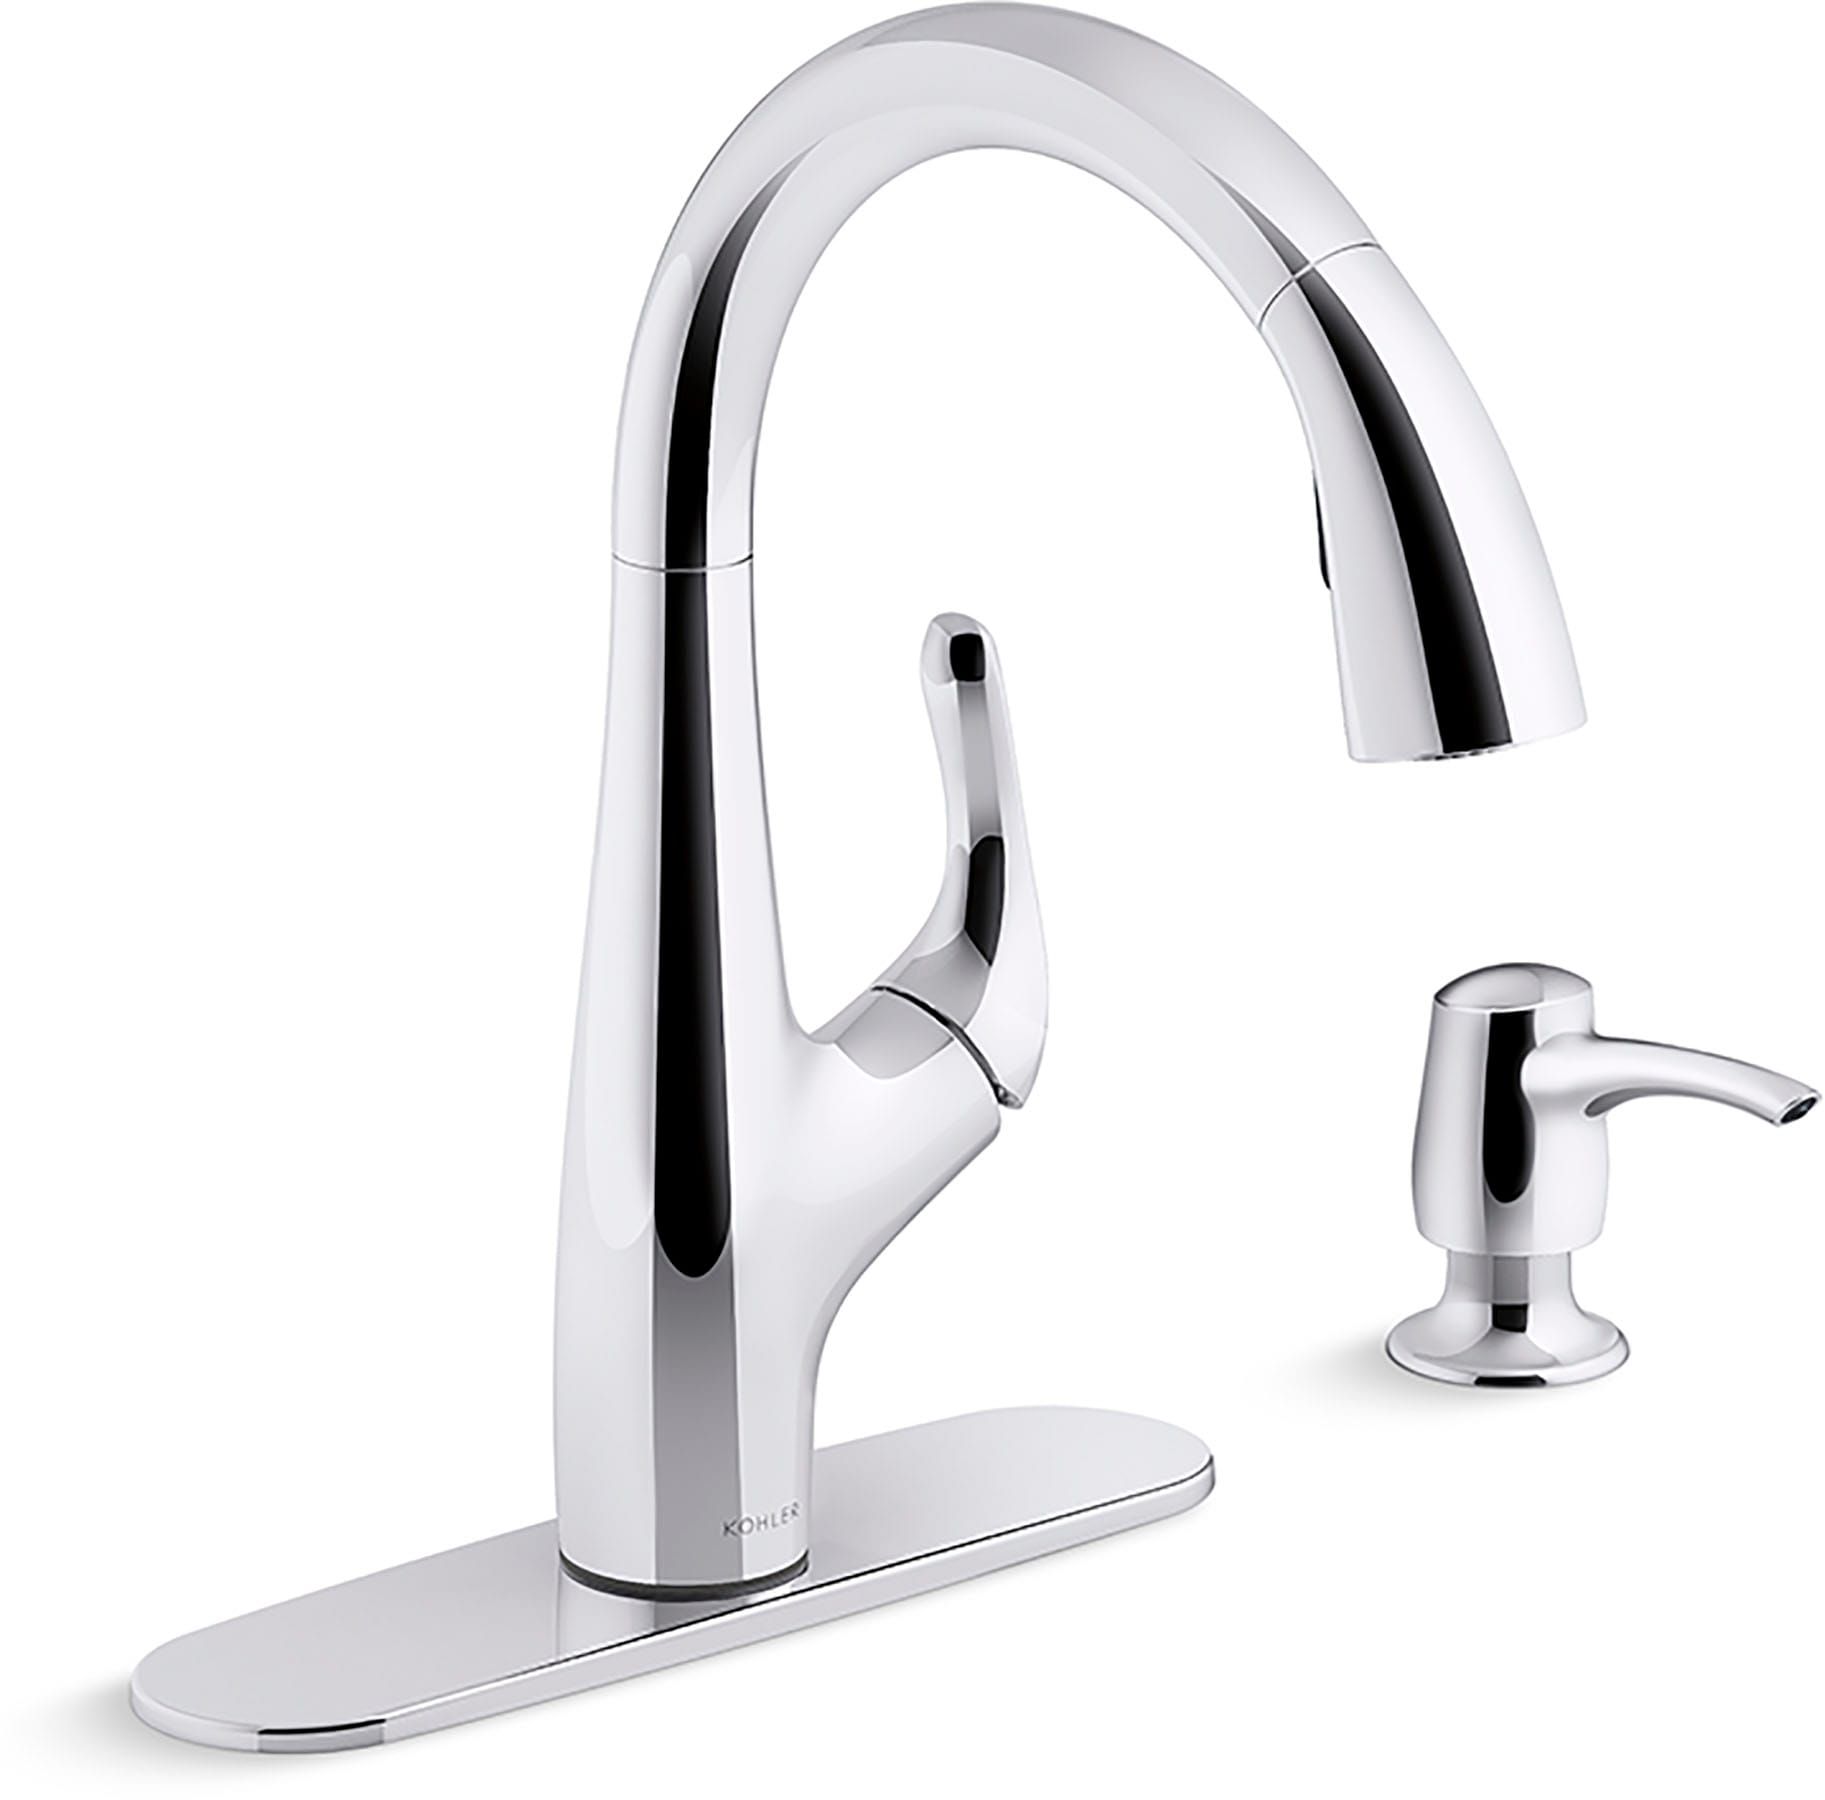 KOHLER Alle Polished Chrome Single Handle High-arc Kitchen Faucet with Deck  Plate and Soap Dispenser Included in the Kitchen Faucets department at 